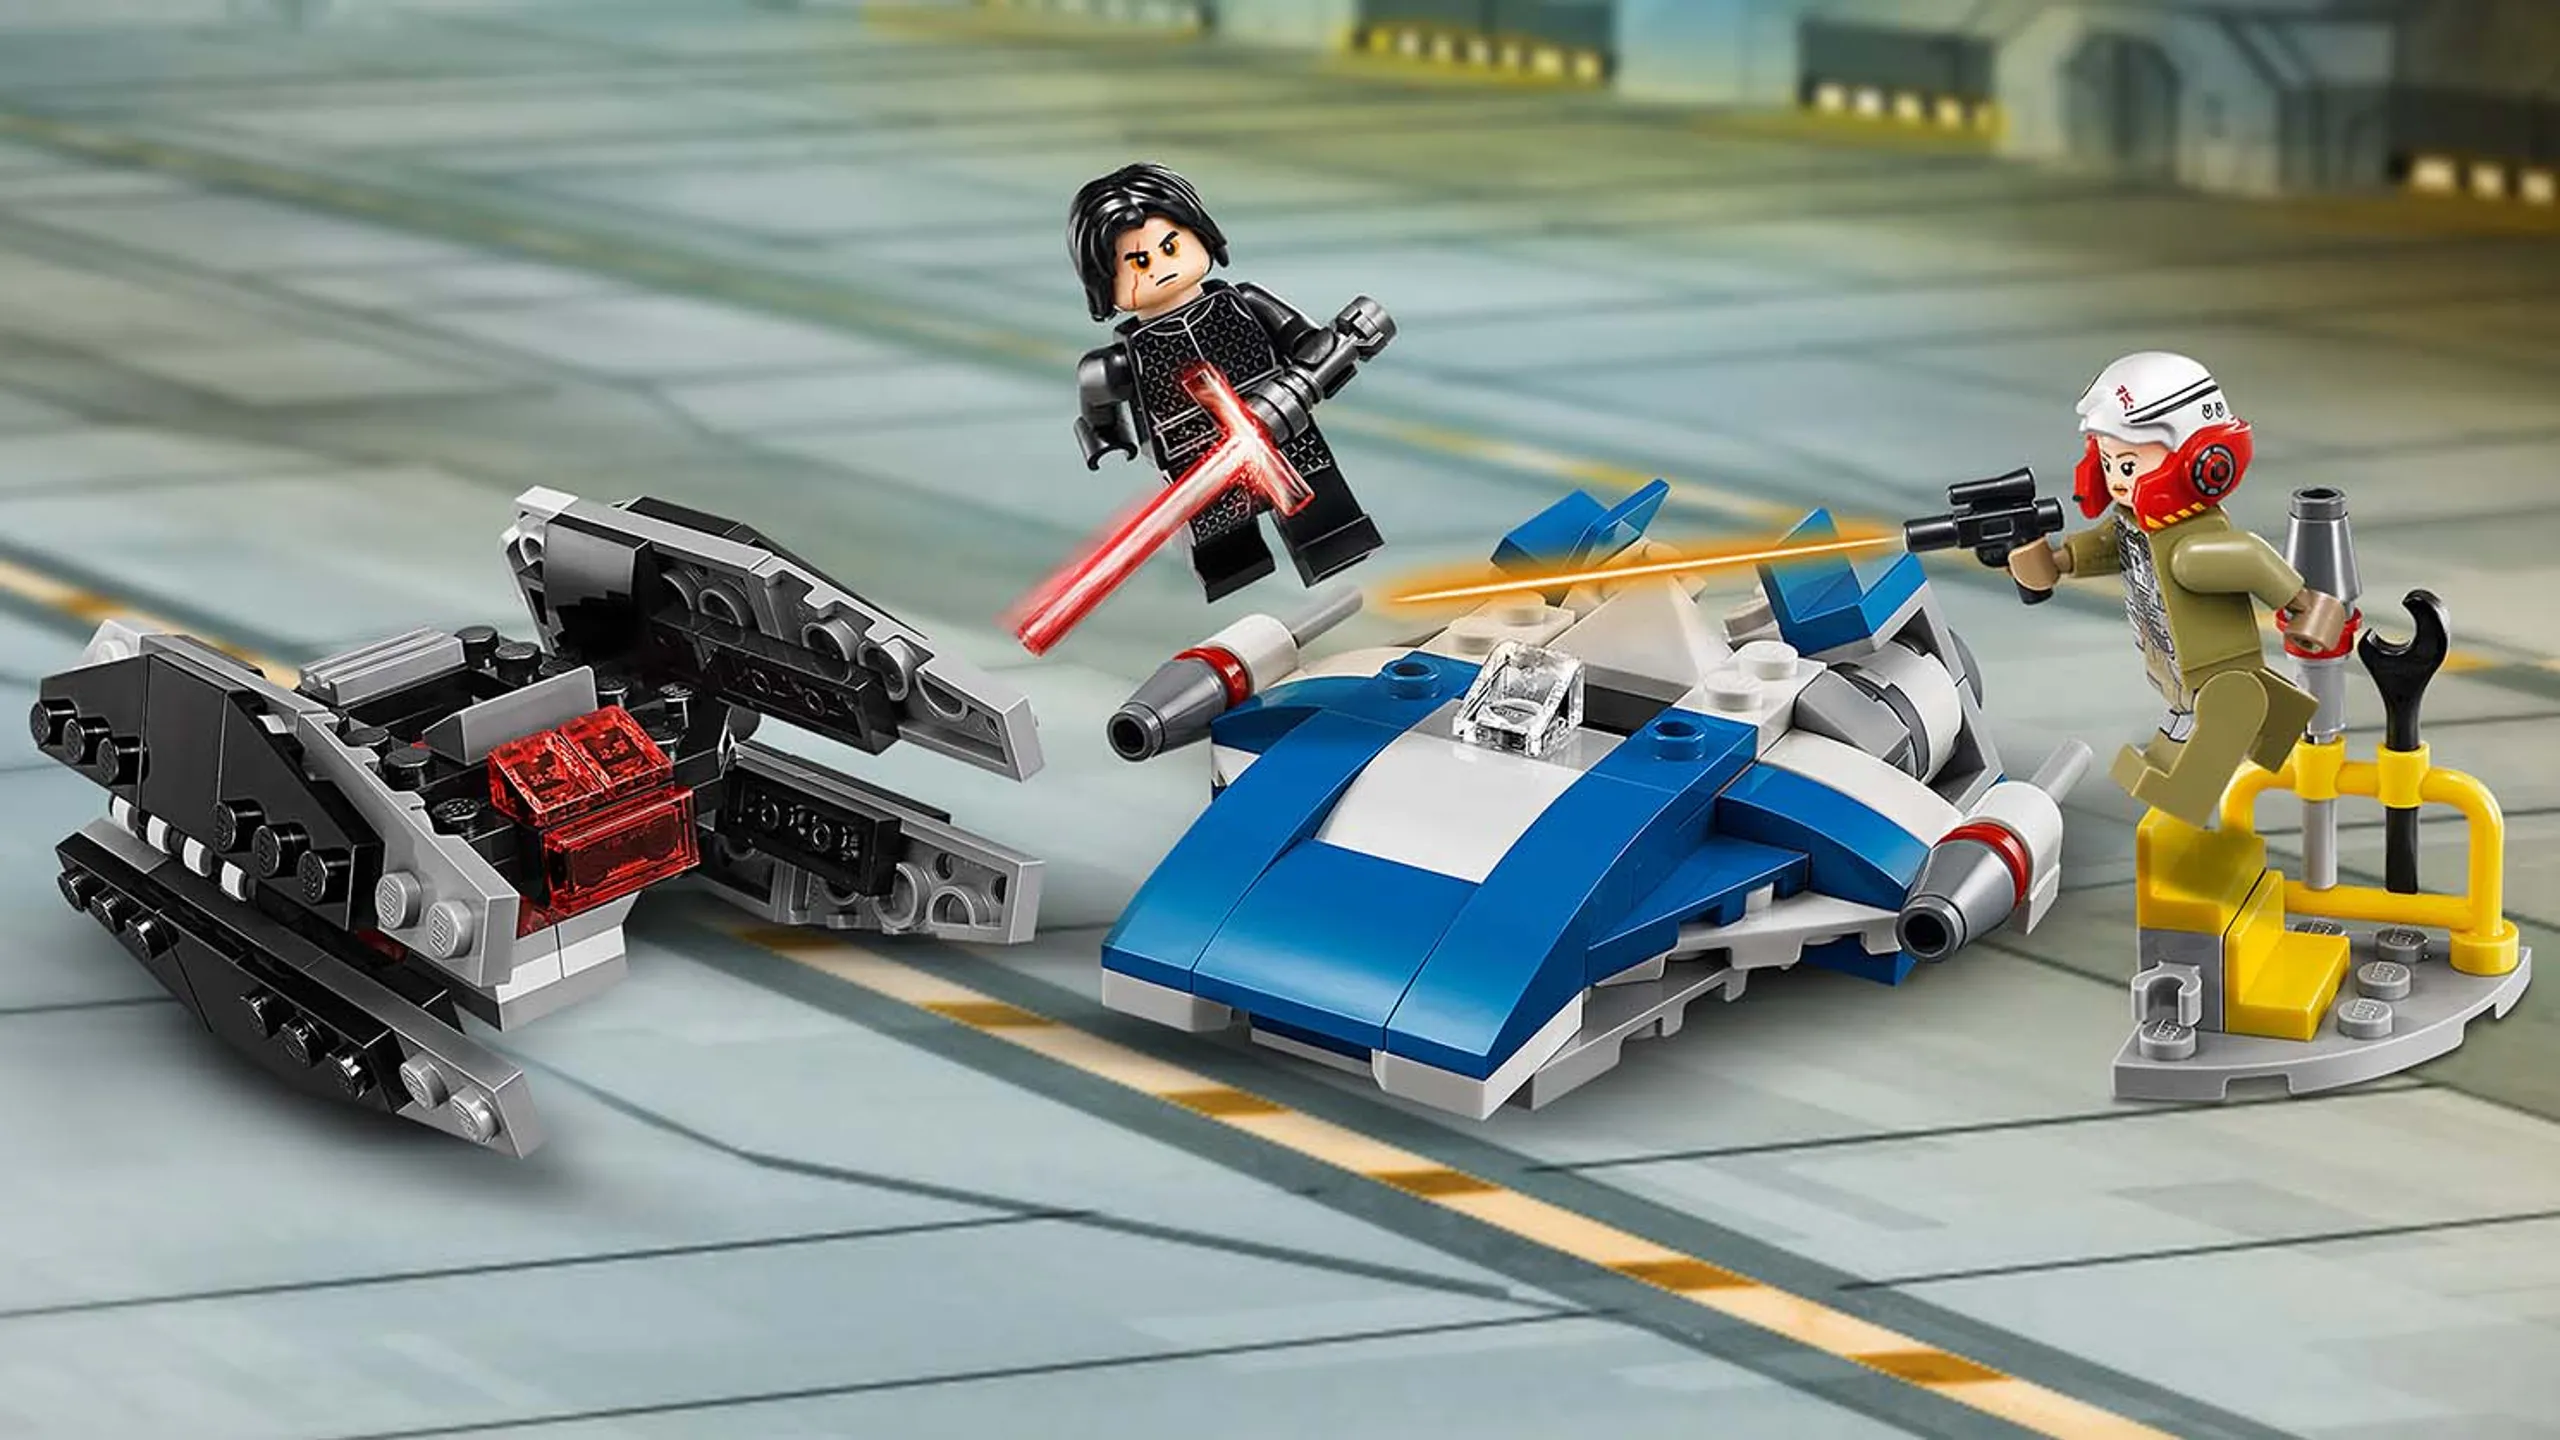 75196 - LEGO Star Wars - A-Wing™ vs. TIE Silencer™ Microfighters - Spaceship, Battle, Missiles, Laser